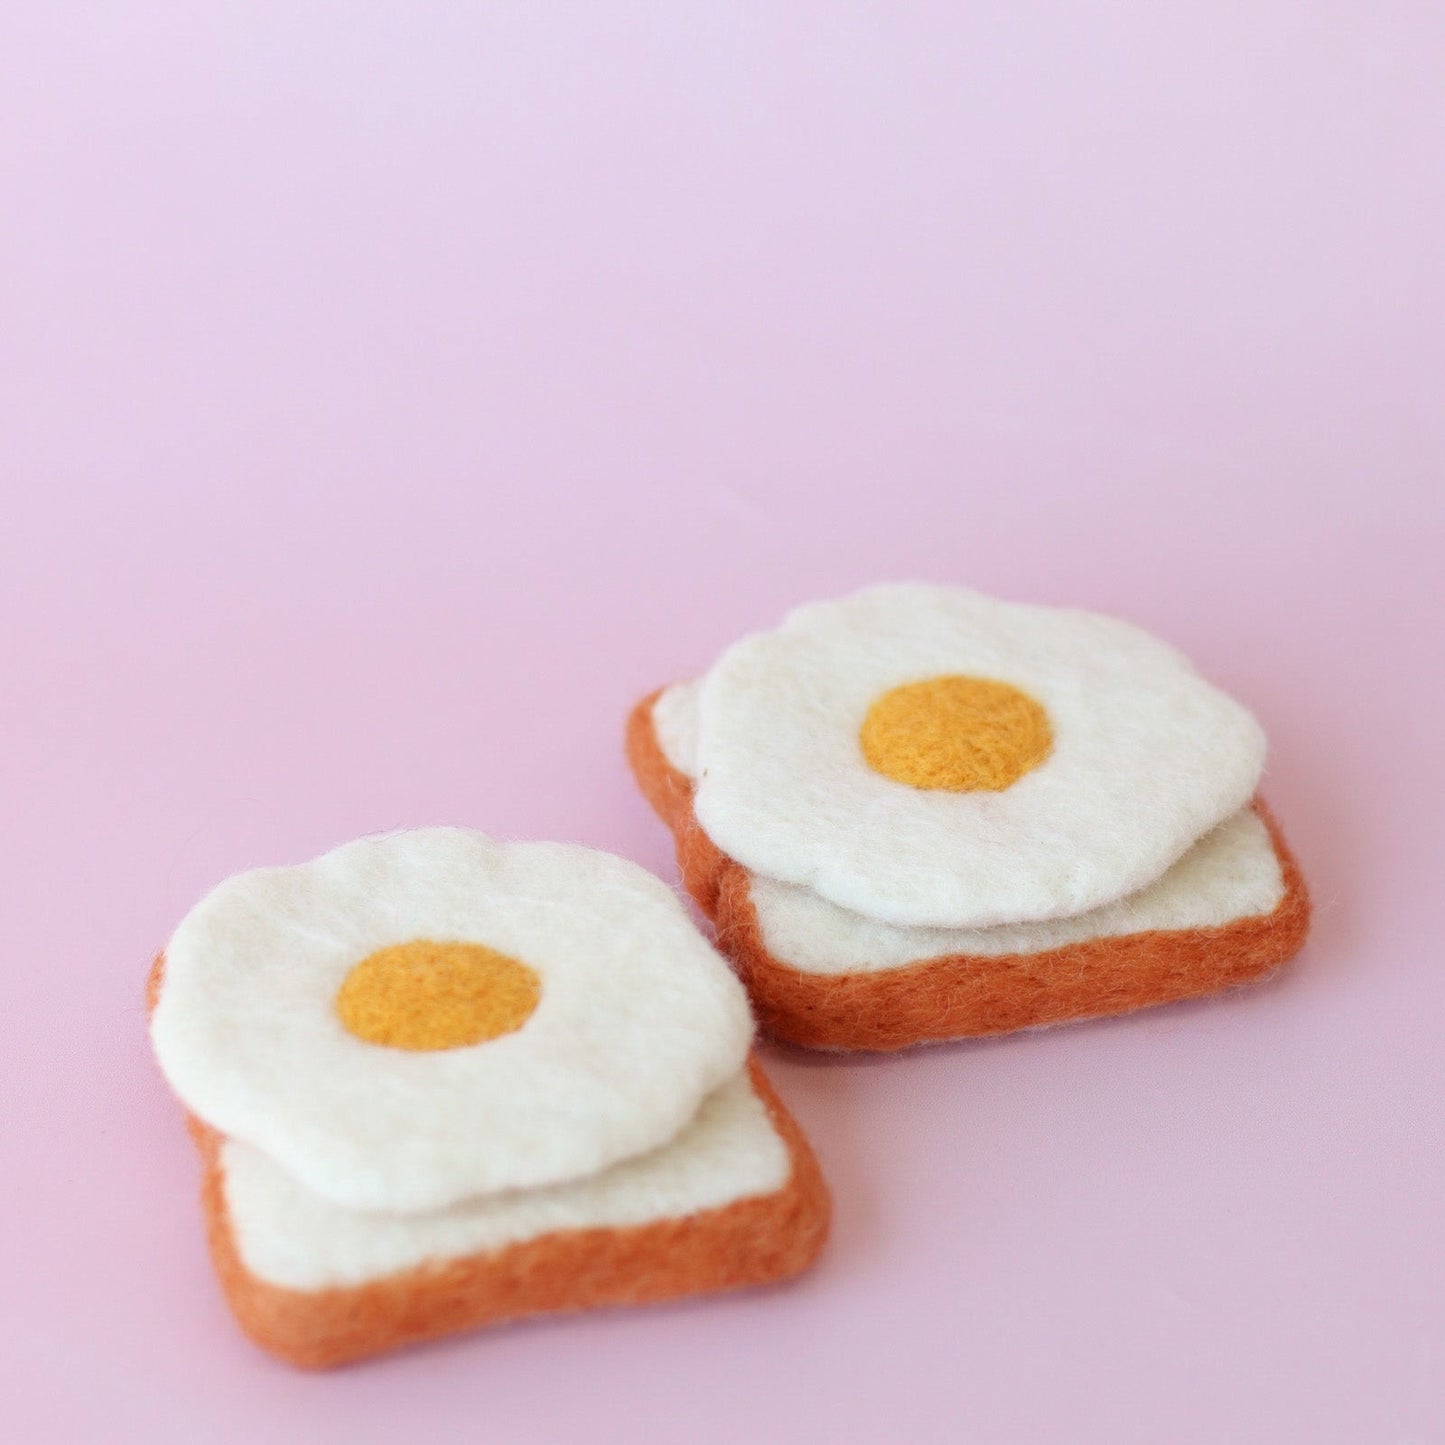 Fried eggs on toast (egg removable)